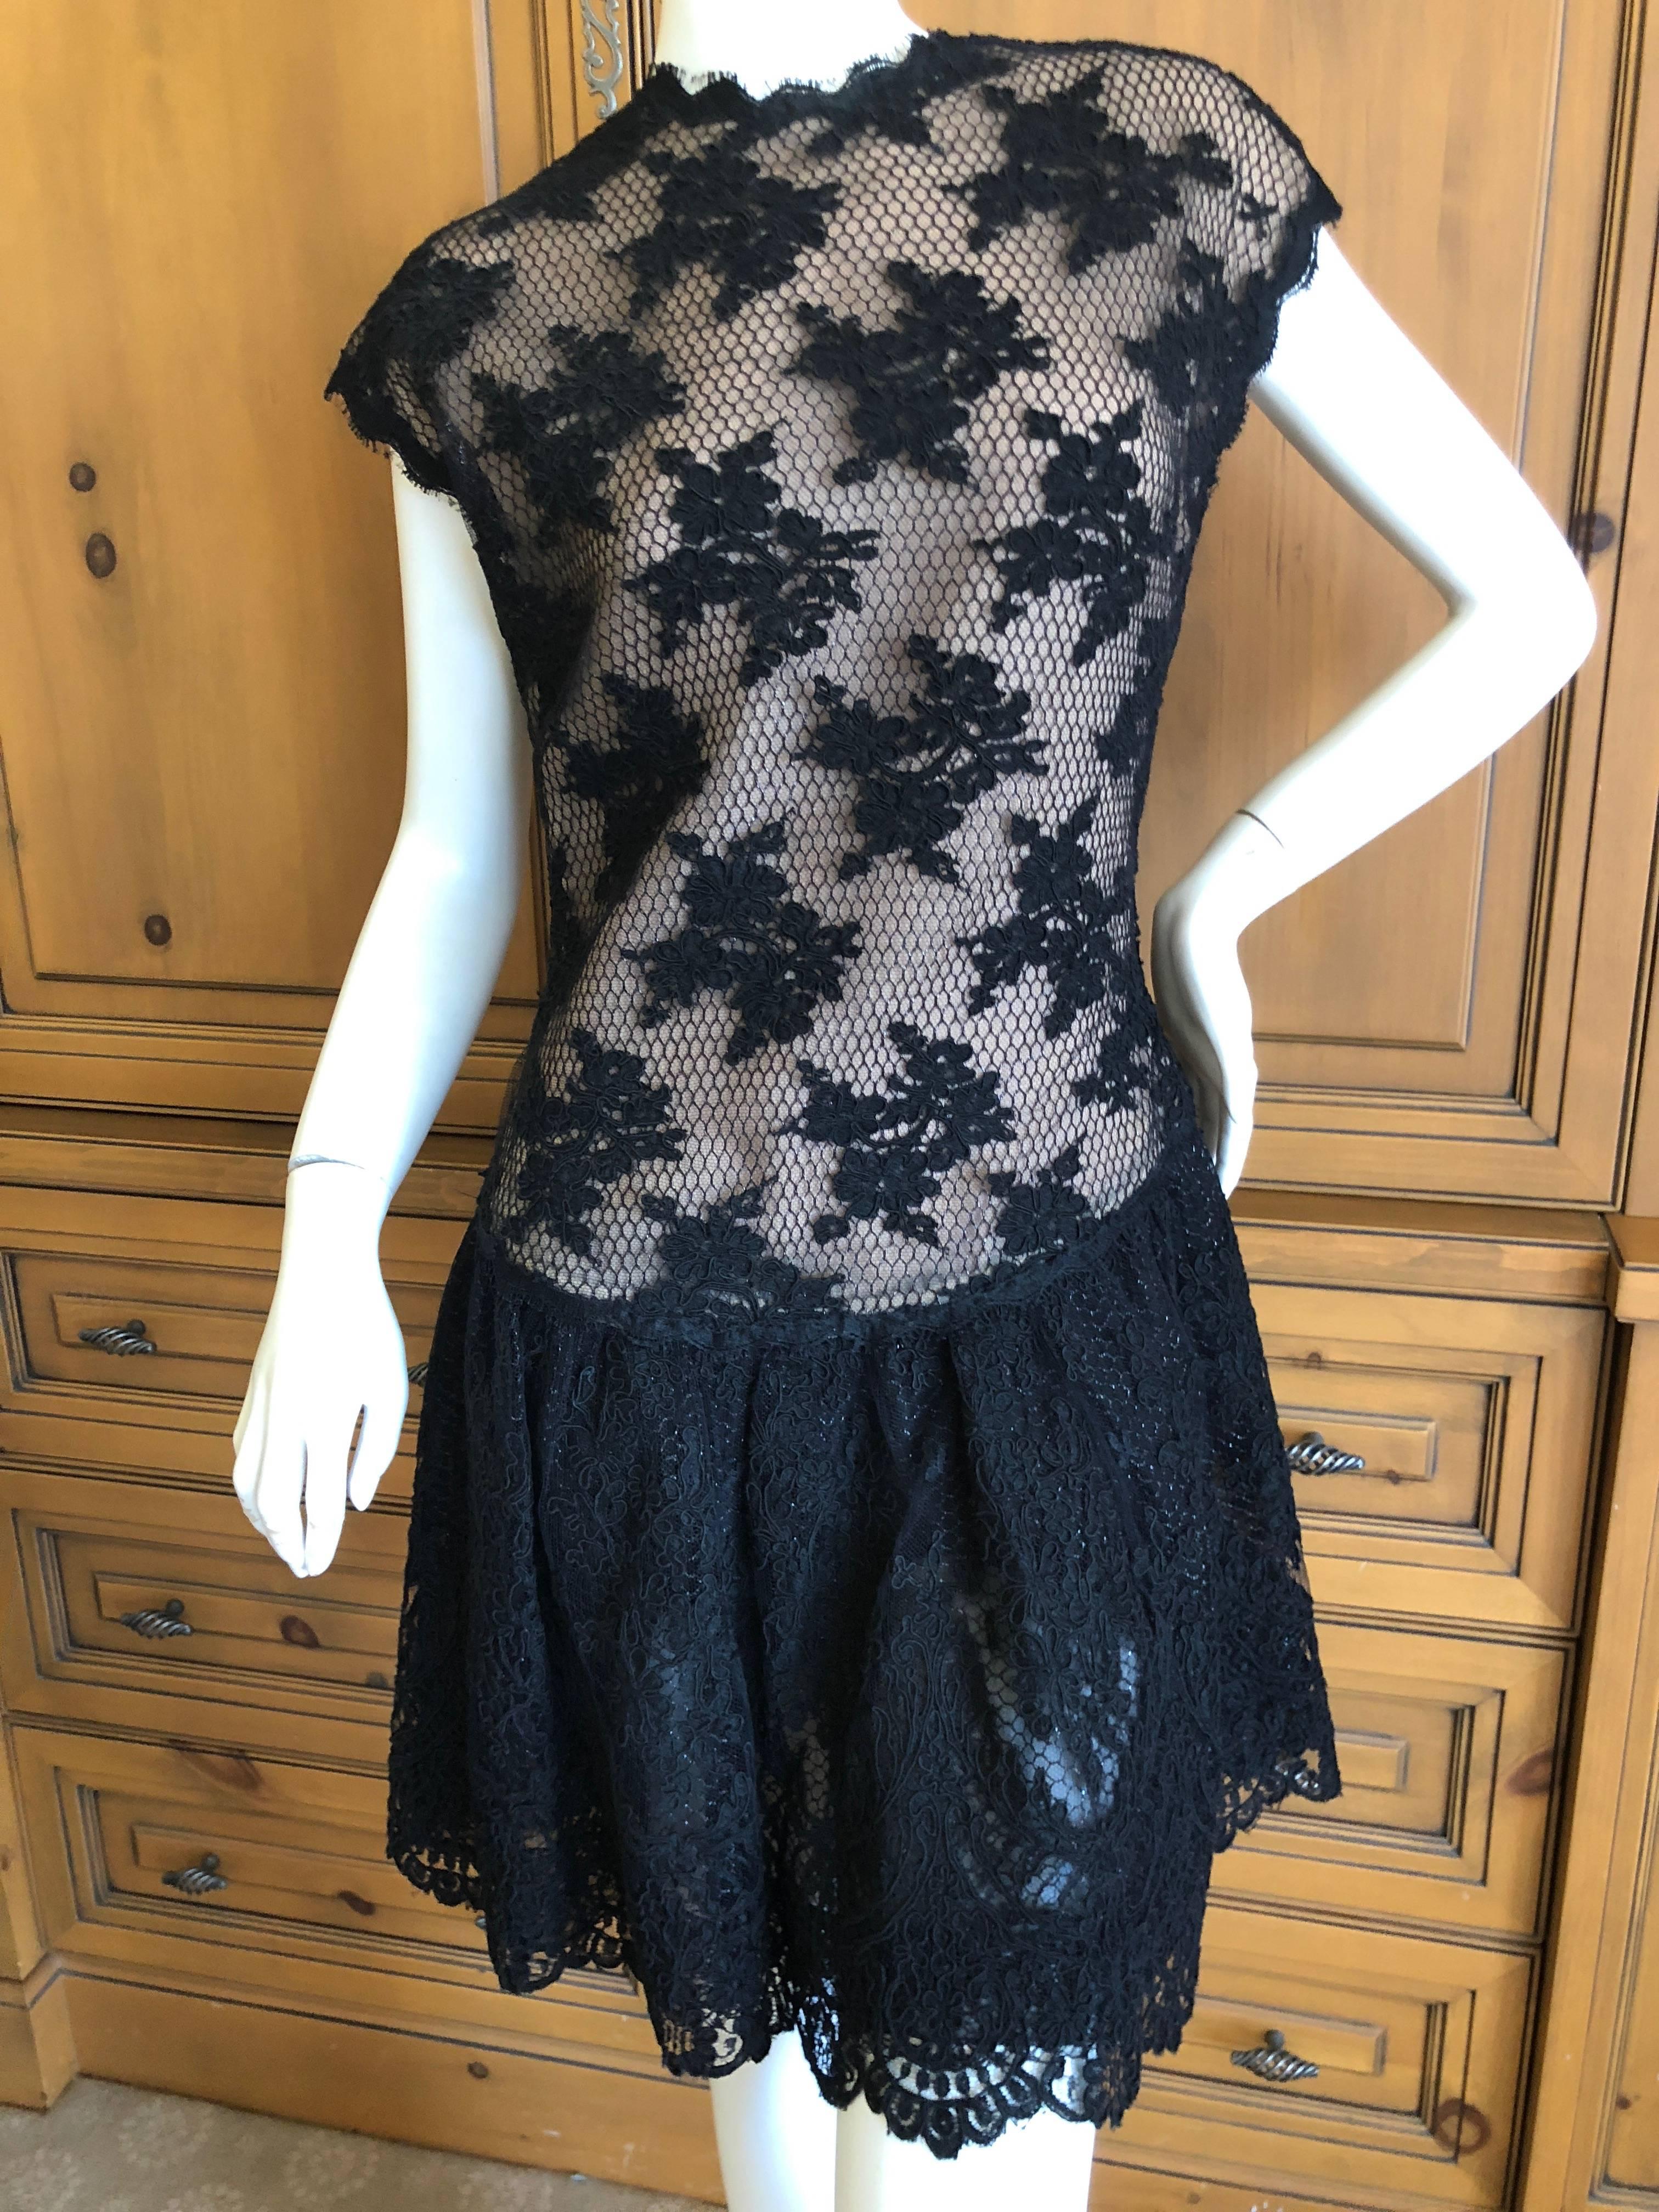 Geoffrey Beene Vintage Metallic Accented Lace Dress with Scallop Edges In Excellent Condition For Sale In Cloverdale, CA